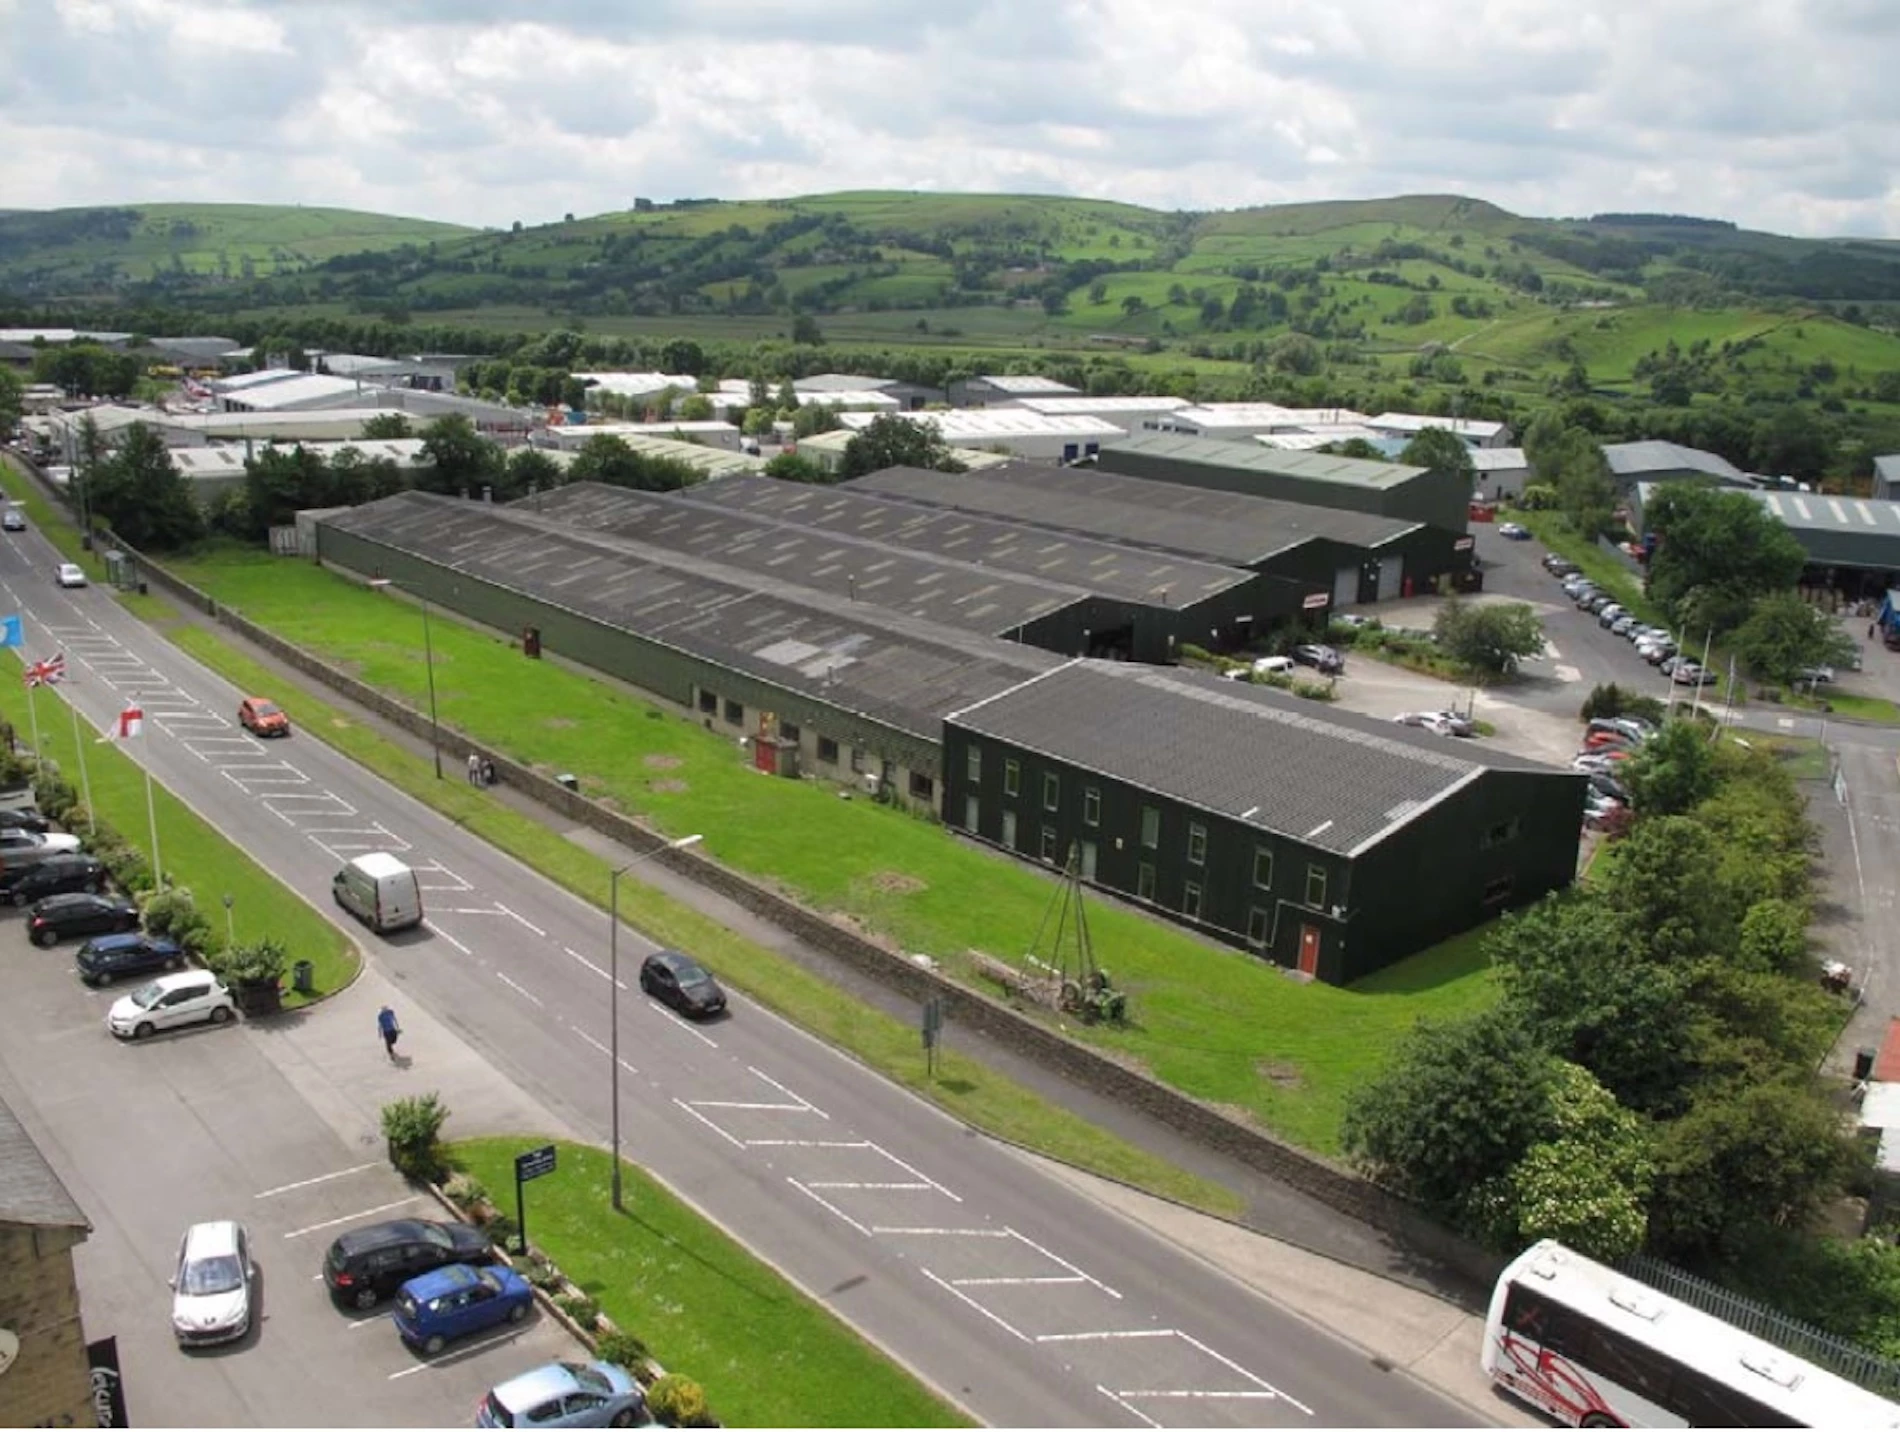 The £6.5m retail park in Skipton.